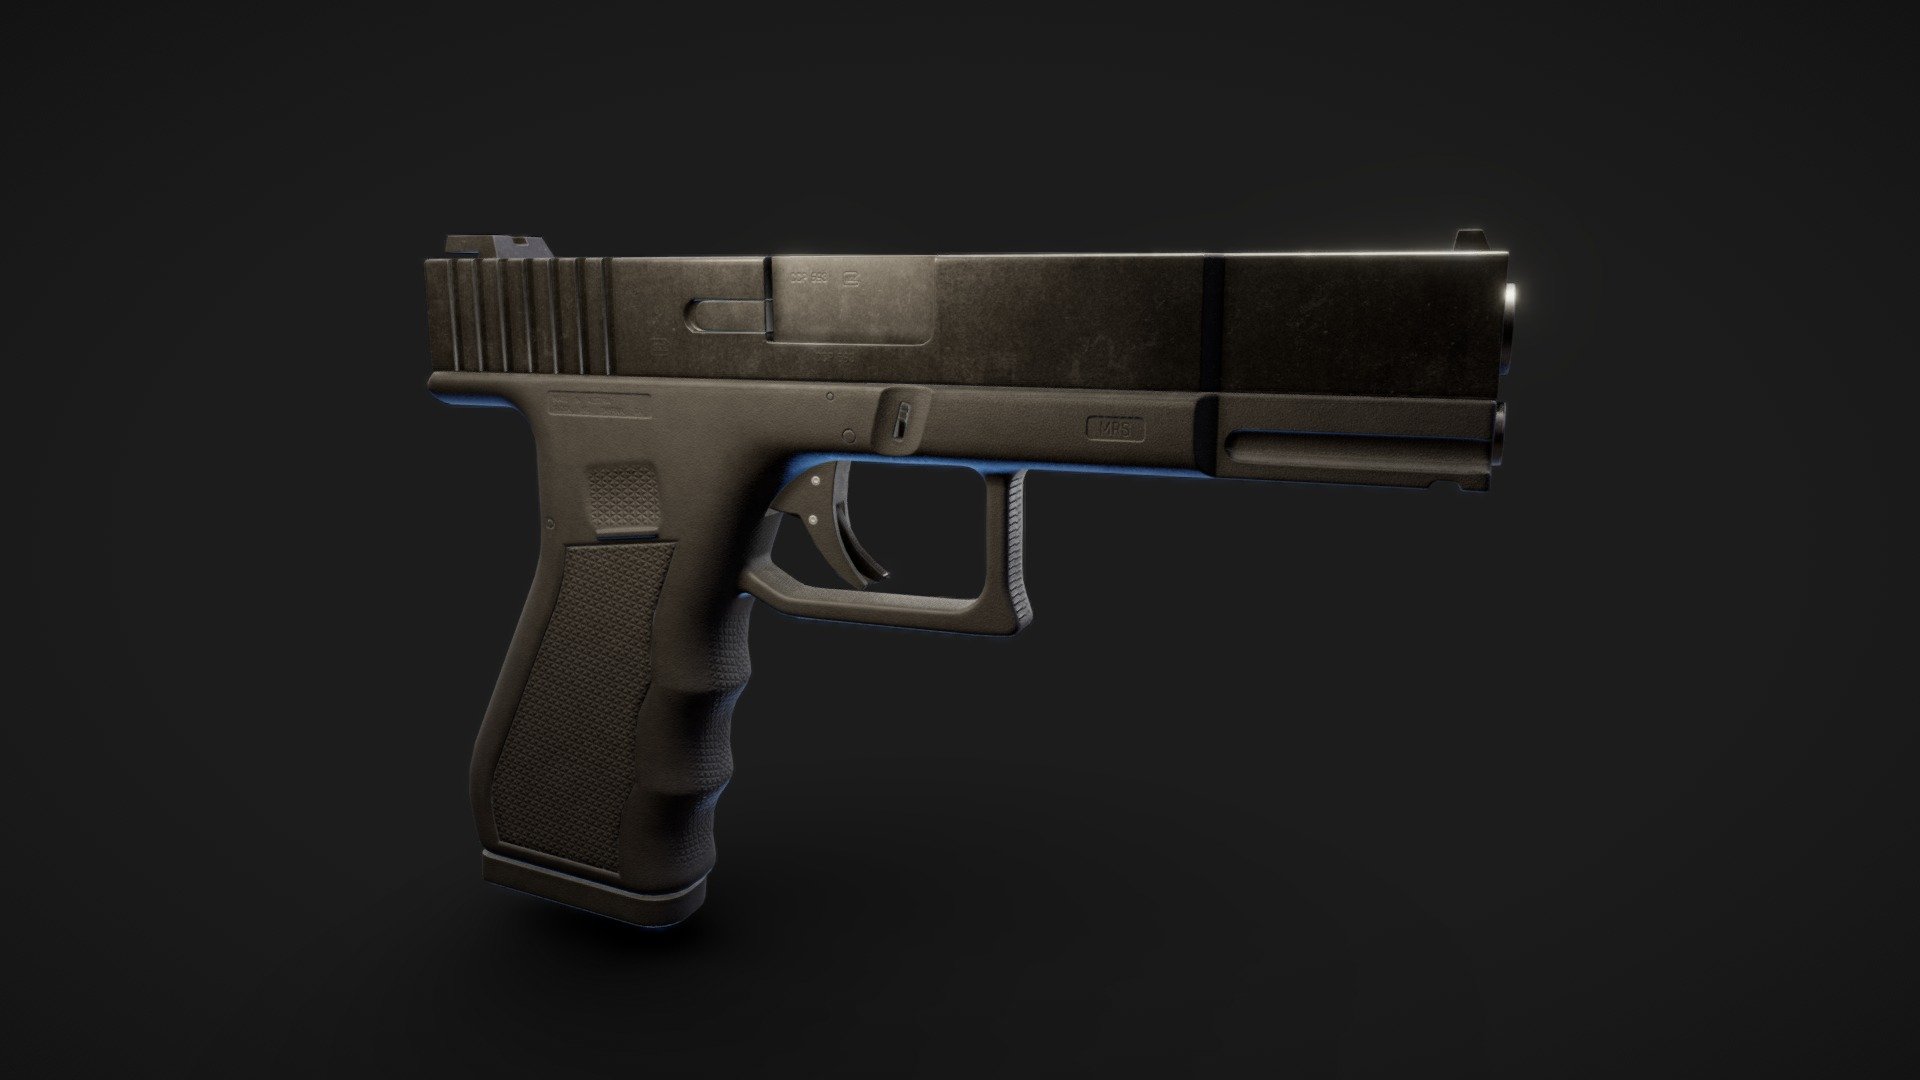 My recreation of the Glock 19. I made it last summer 2023 while learning to use Plasticity for the first time. There are a lot of changes from the original design because when I started the project, I didn't have in mind to model the gun exactly the same, it was more of a learning exercise. But in the end I wanted to finish it and texturize the result to see how this new software would adapt to my workflow, giving this as a result. On the other hand, I tried to keep the geometry with a quad-based topology, it's always a challenge to generate a mesh with perfect loops. But at the end of the project I used tris to close parts. Although the mesh may not be optimal for a game engine, it serves its purpose as a valuable learning exercise rather than a production-ready asset 3d model